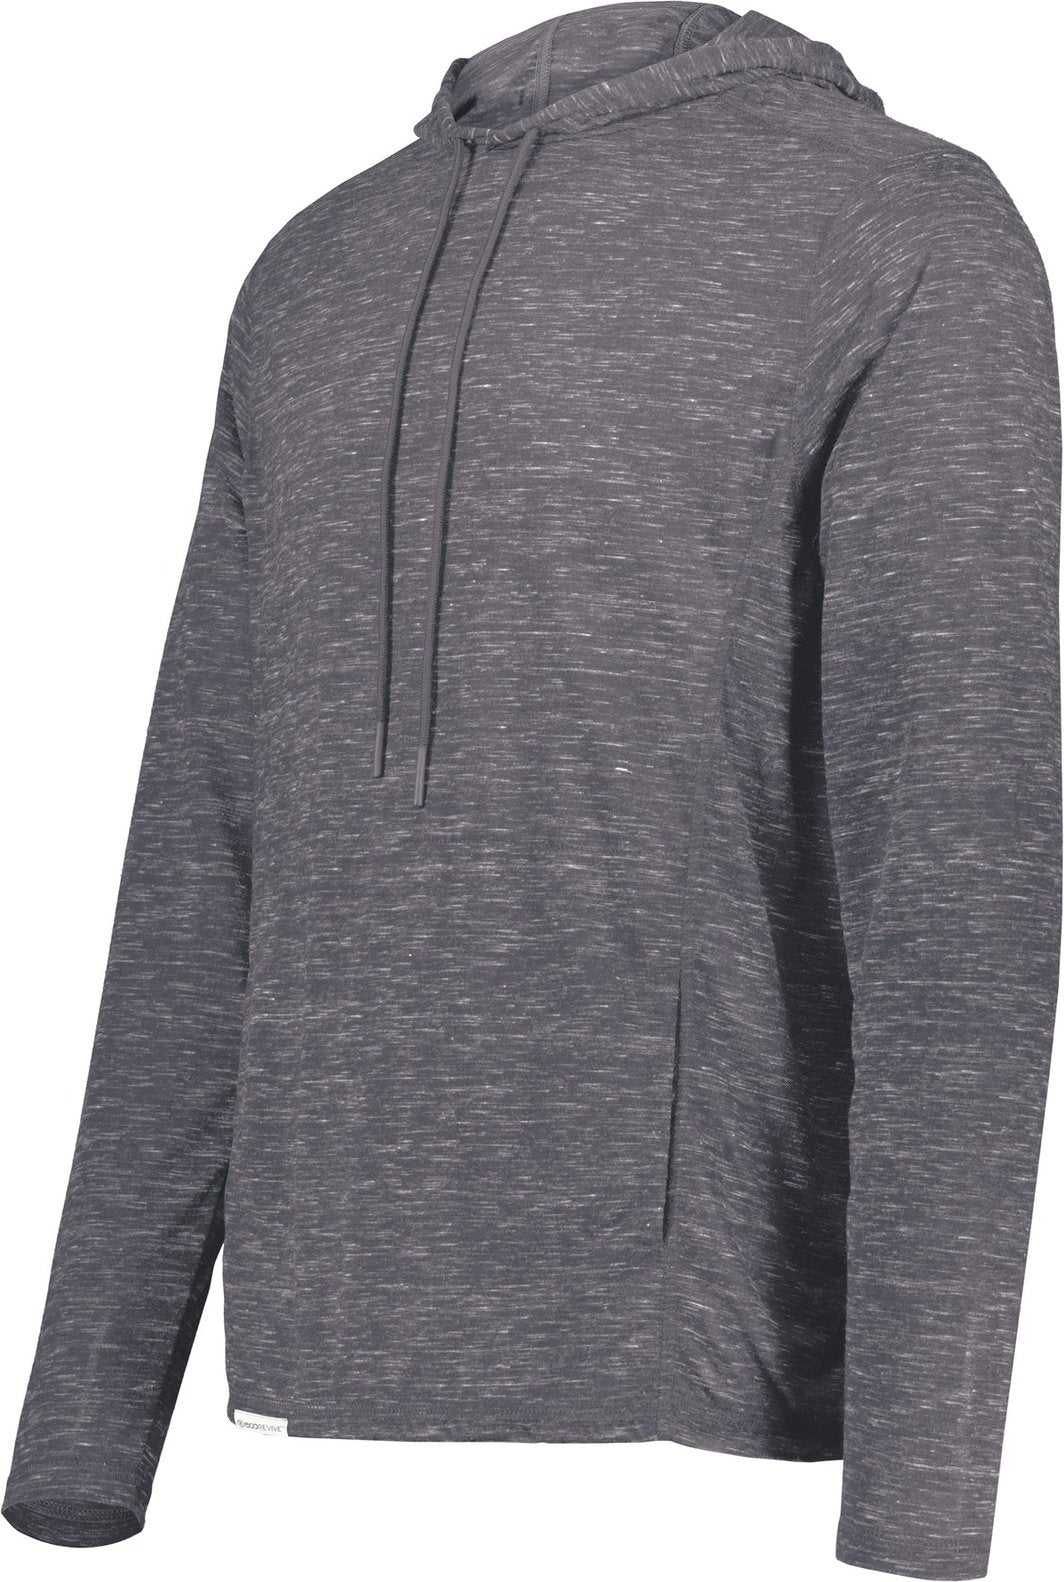 Holloway 222745 Monterey Hoodie - Carbon Heather - HIT a Double